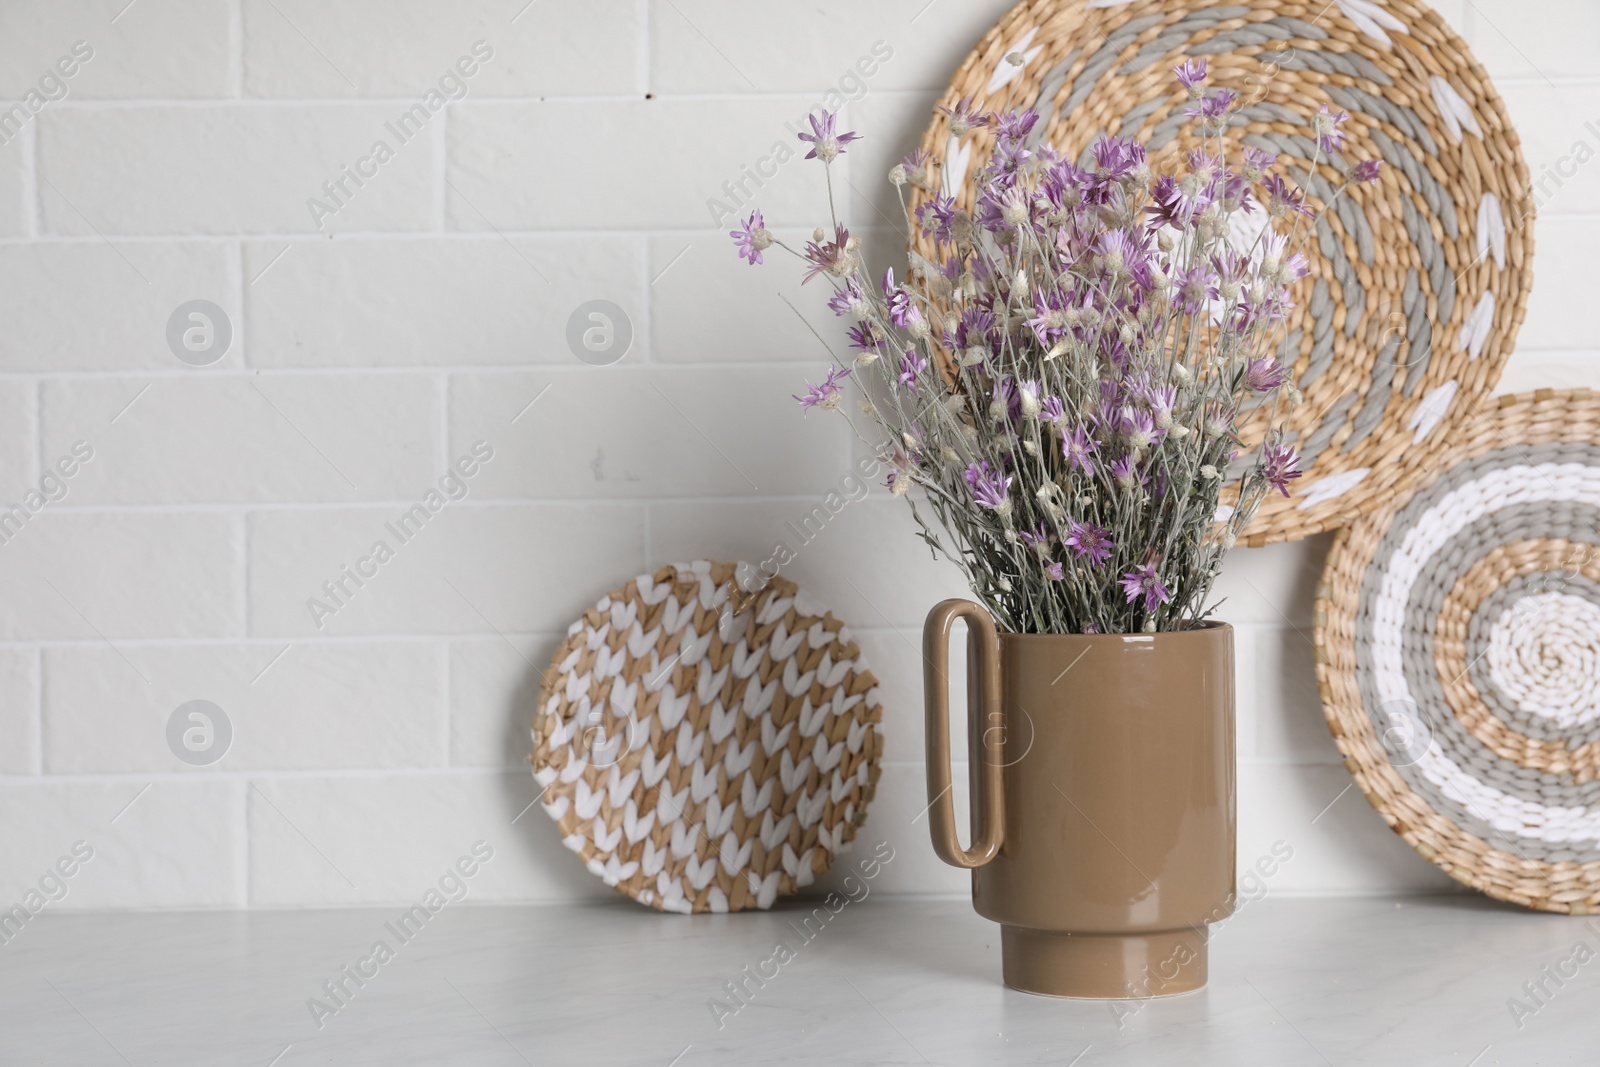 Photo of Ceramic vase with dry plants and decor on light table. Space for text